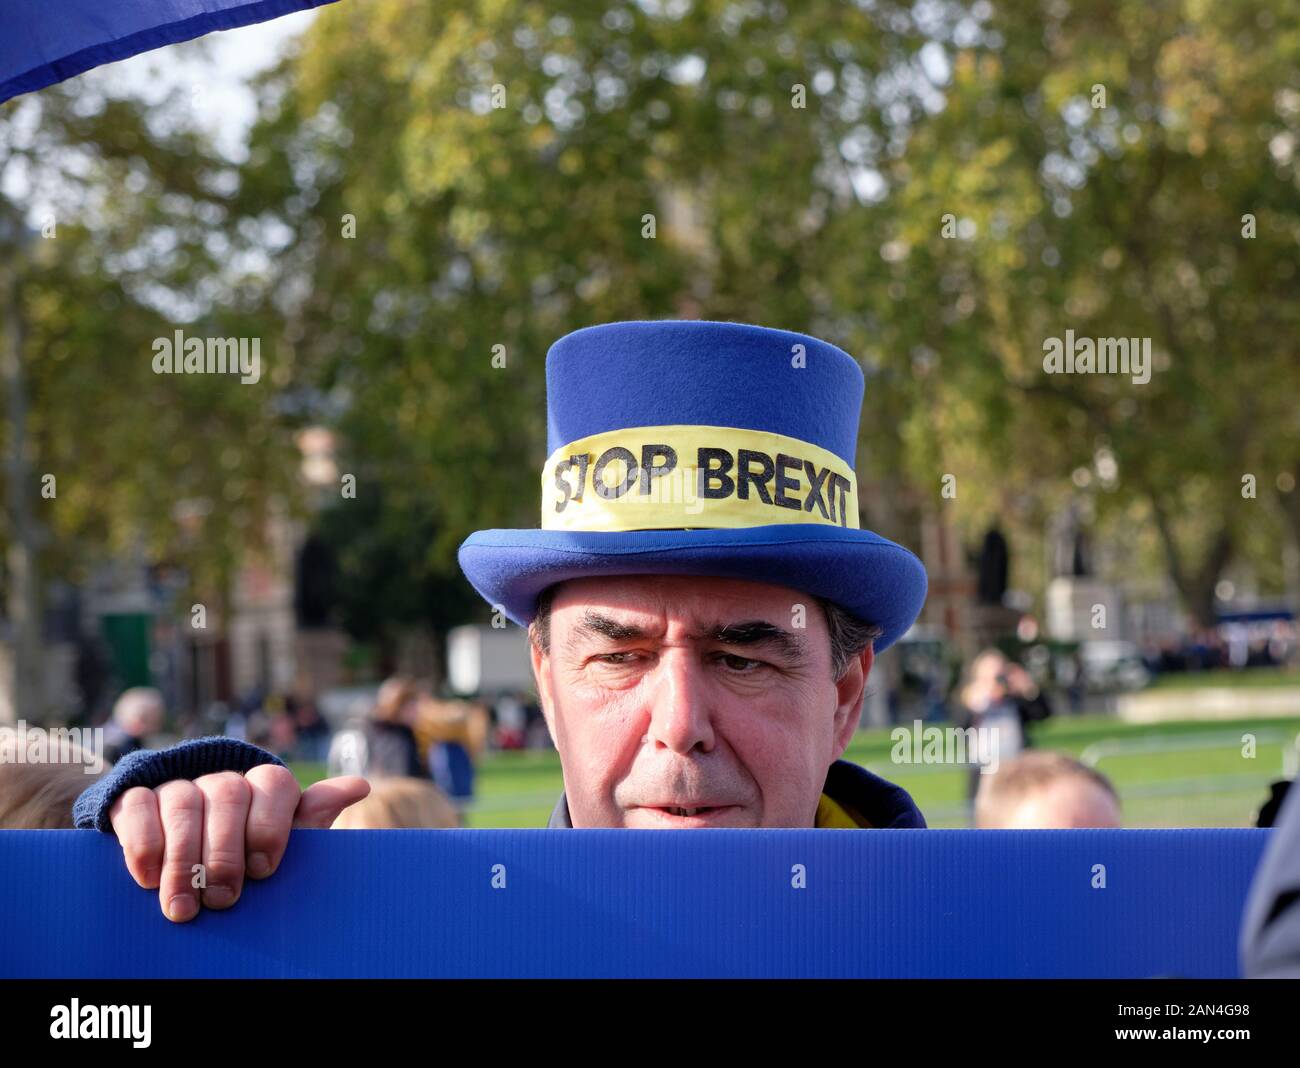 Head of Mr Stop Brexit,  Steve Bray appearing above a blue banner as if to say I'm still here Stock Photo